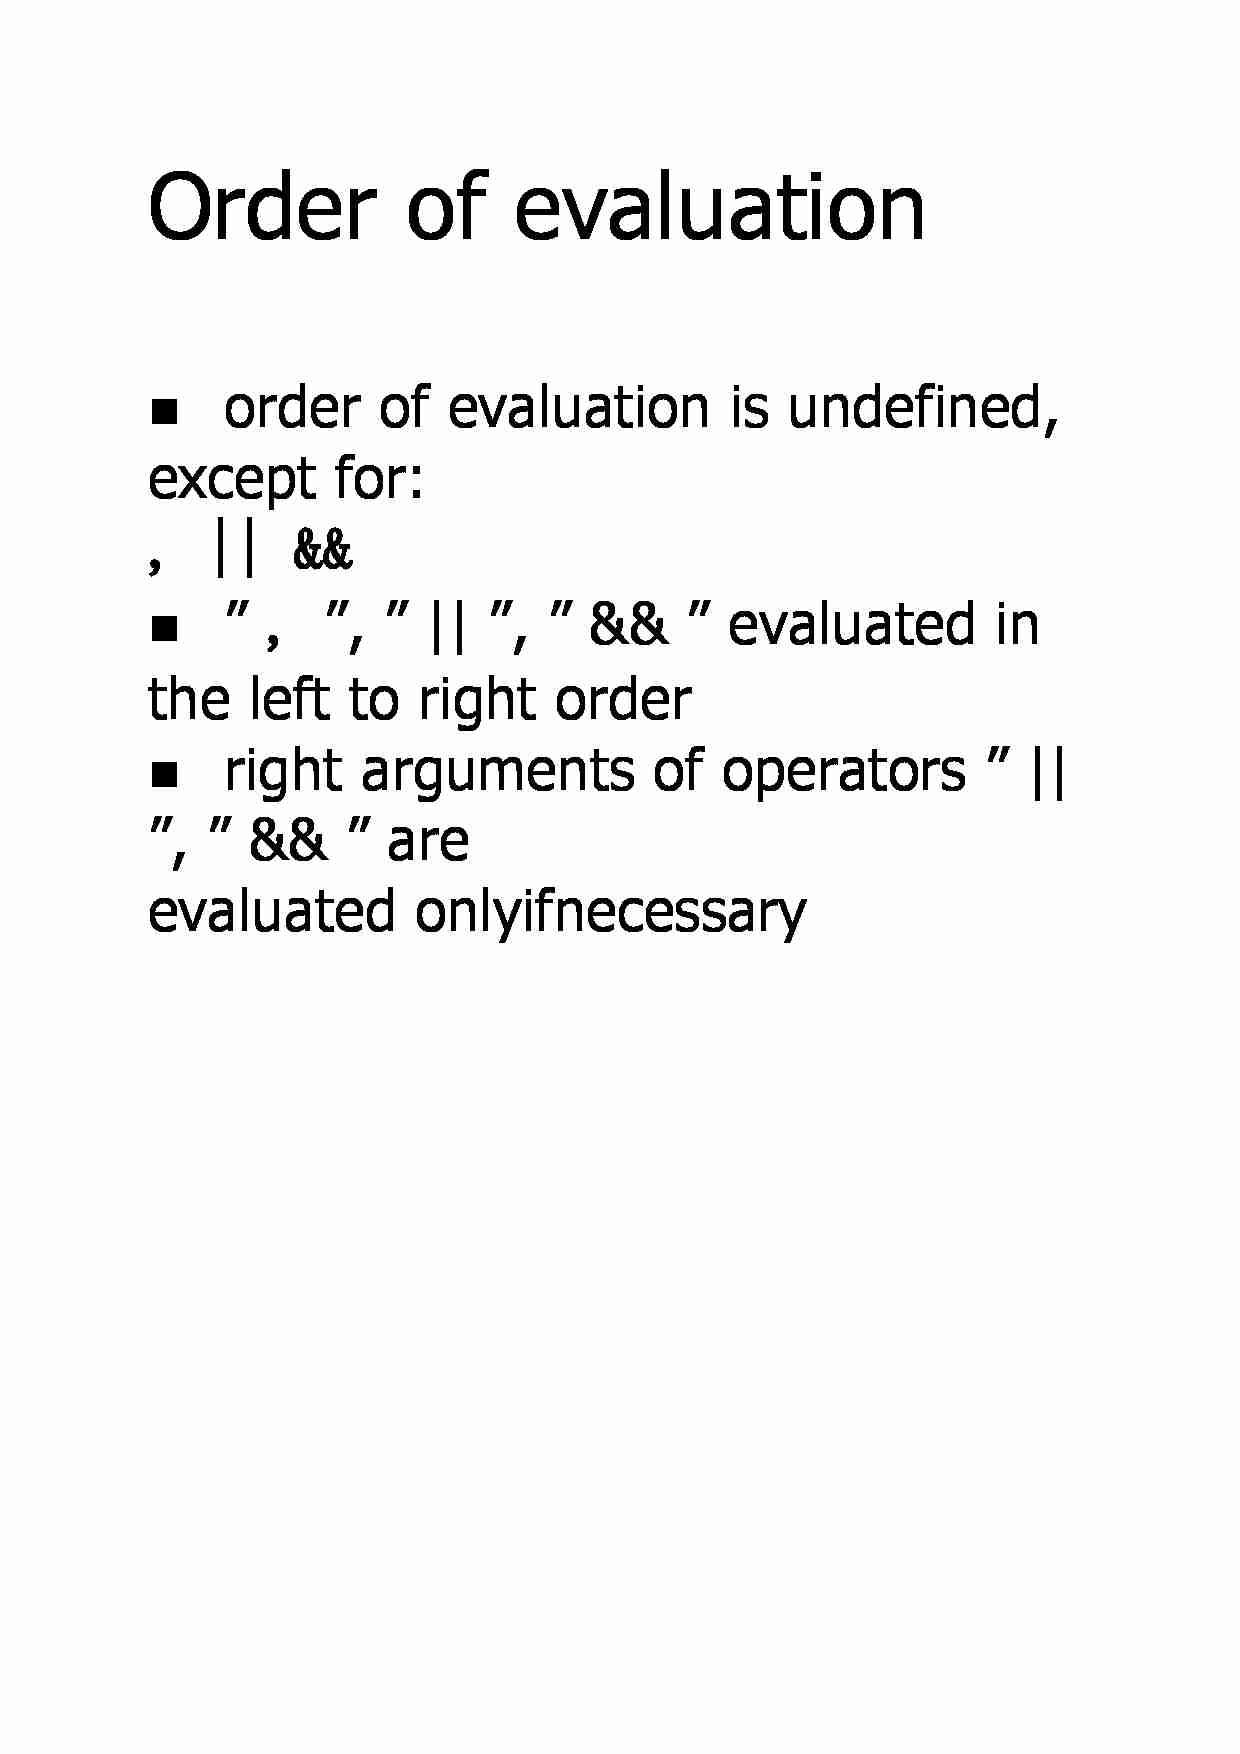 Order of evaluation - strona 1